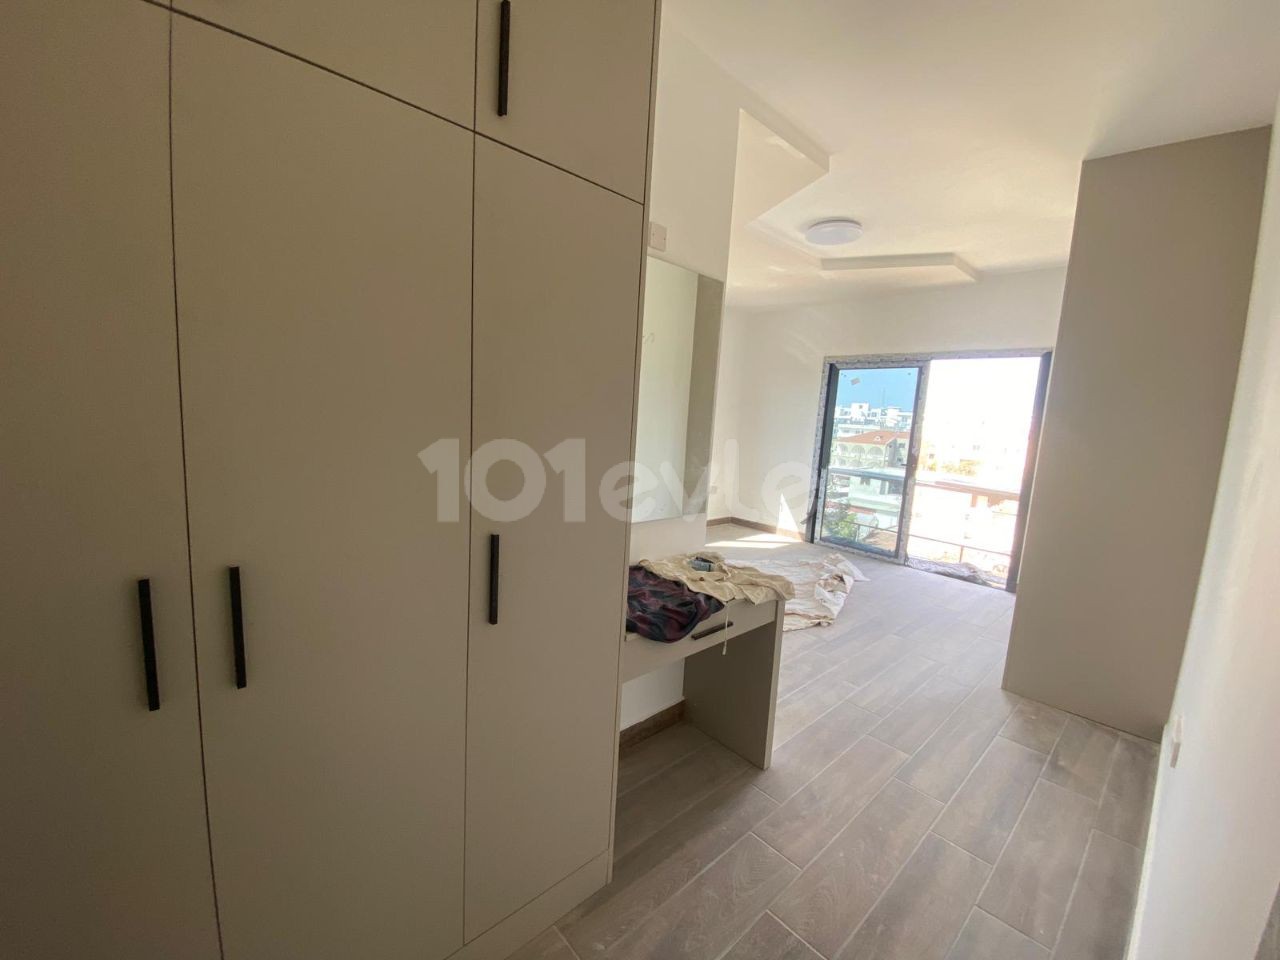  3+1 ,160 SQUARE METERS PETHOUSE APARTMENT FOR SALE IN KAYMAAKLIDA